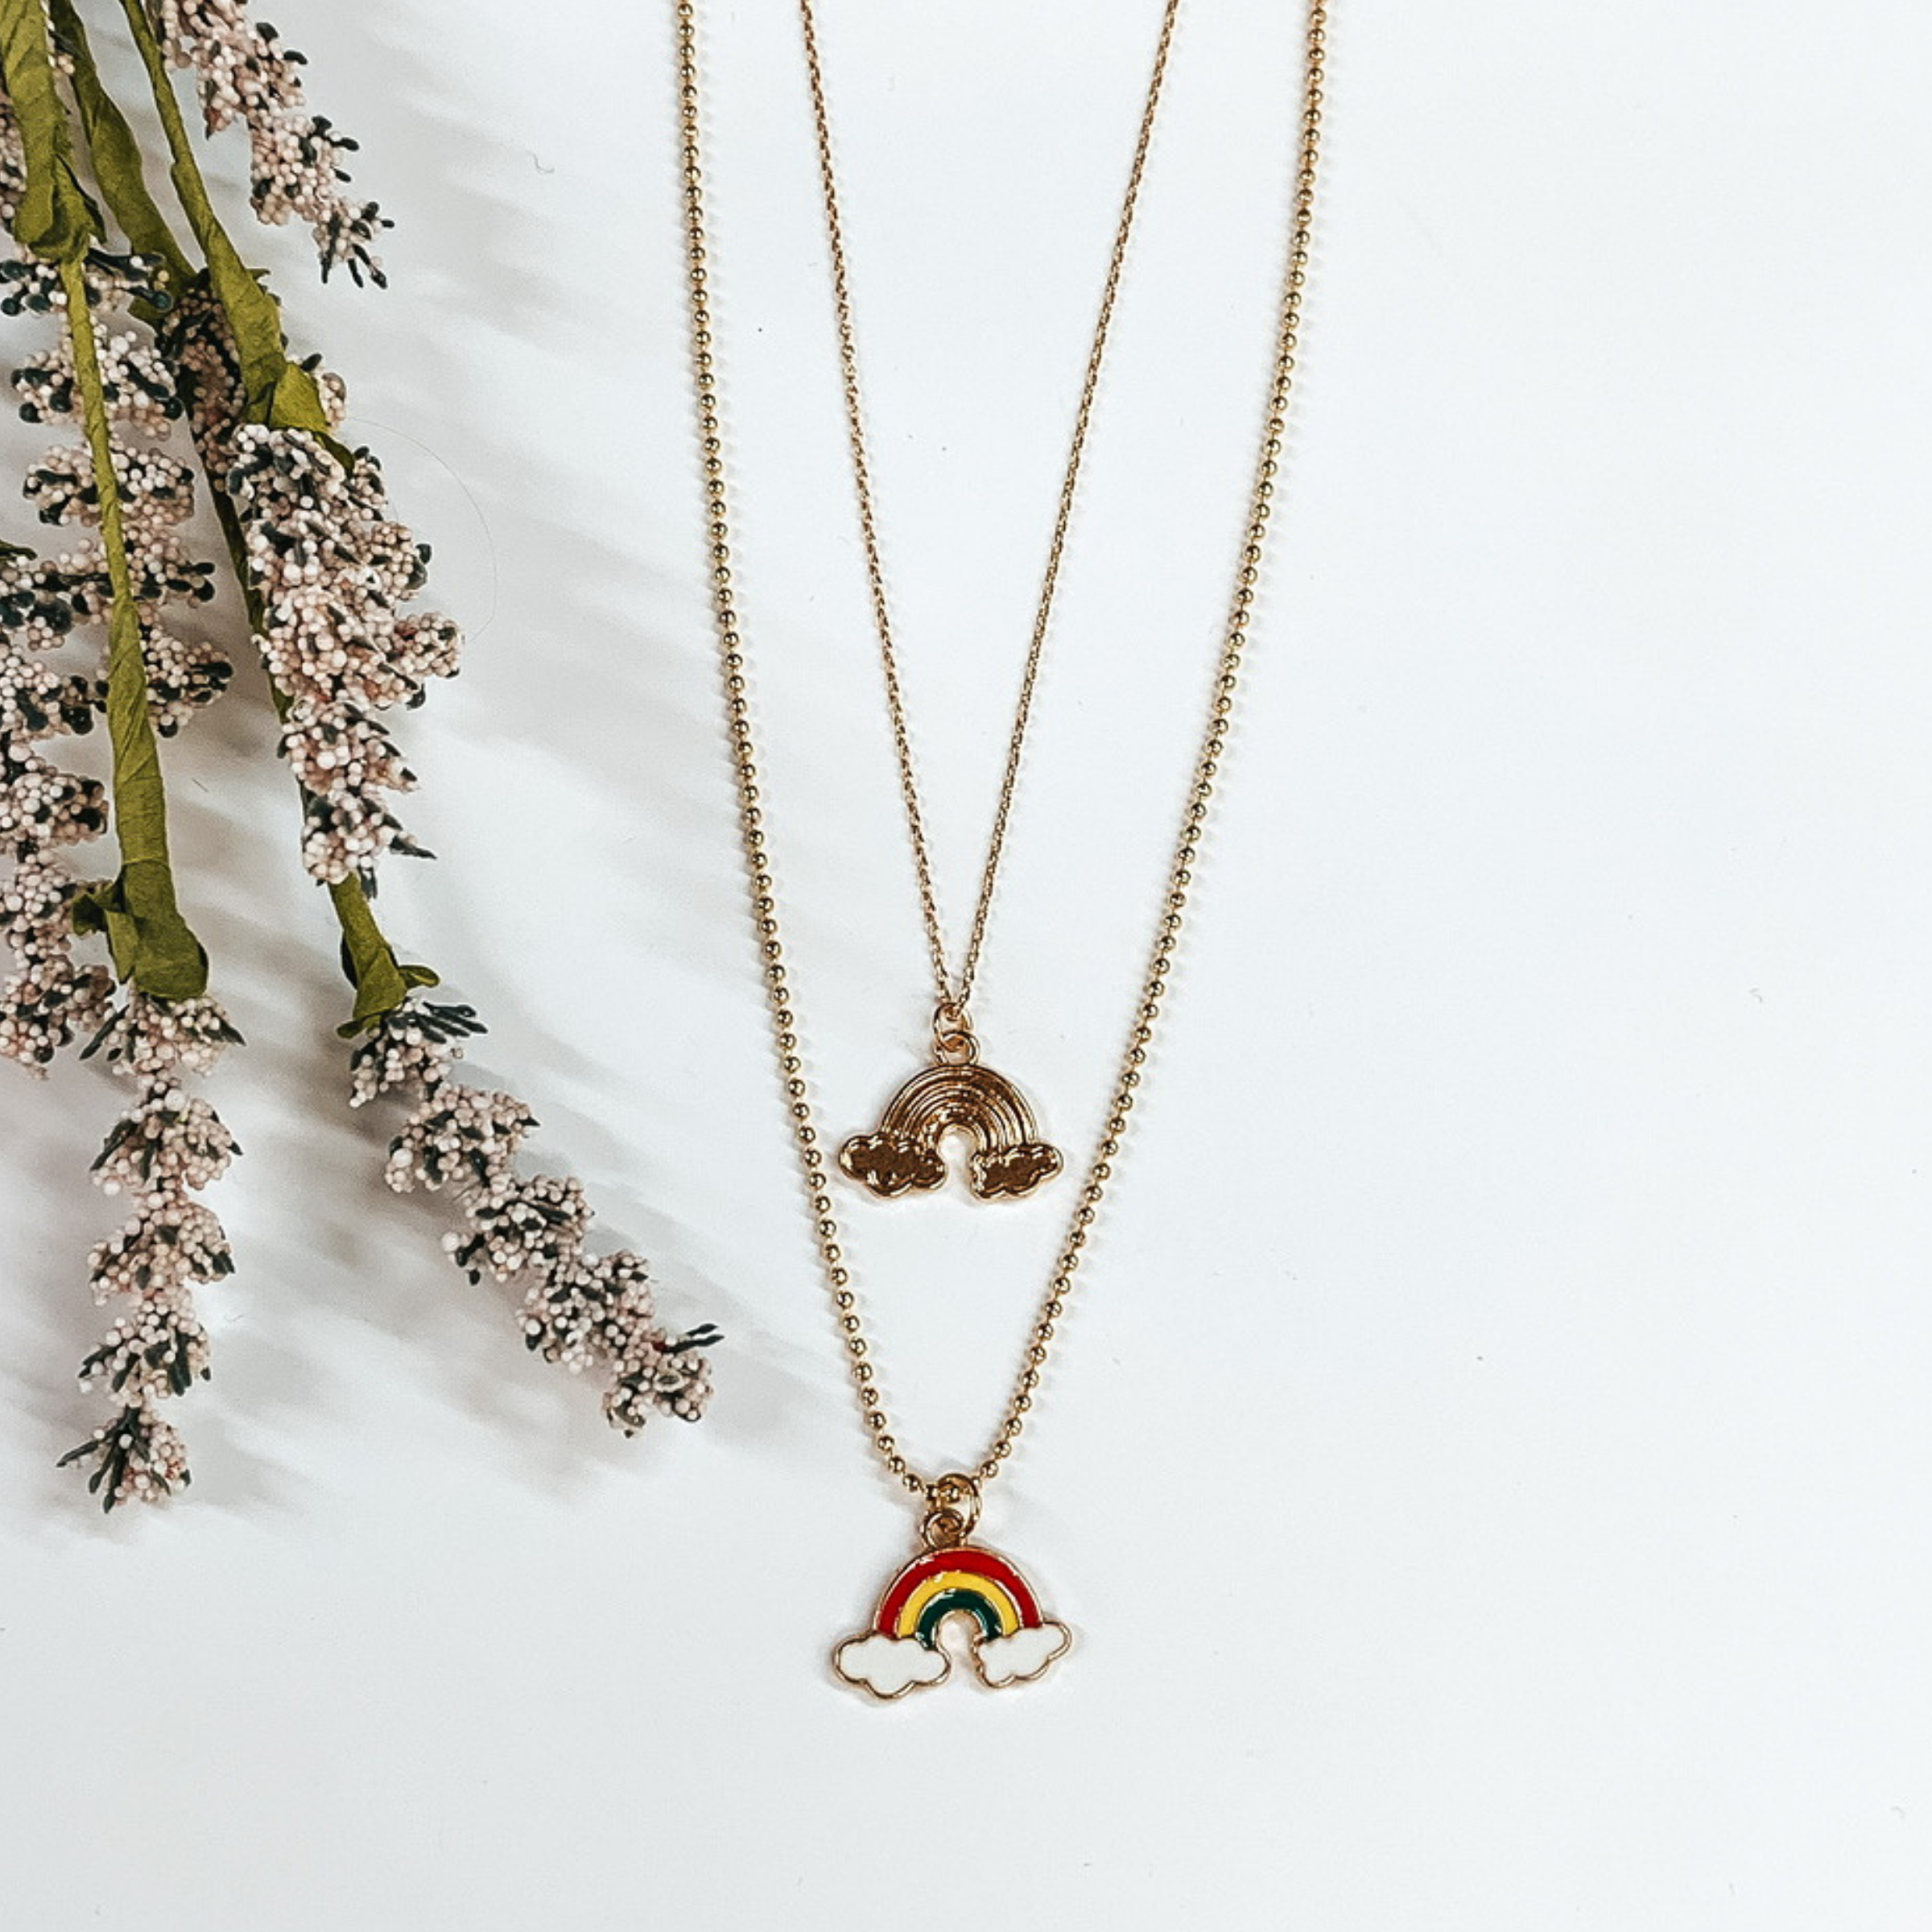 Somewhere Over the Rainbow Gold Necklace - Giddy Up Glamour Boutique